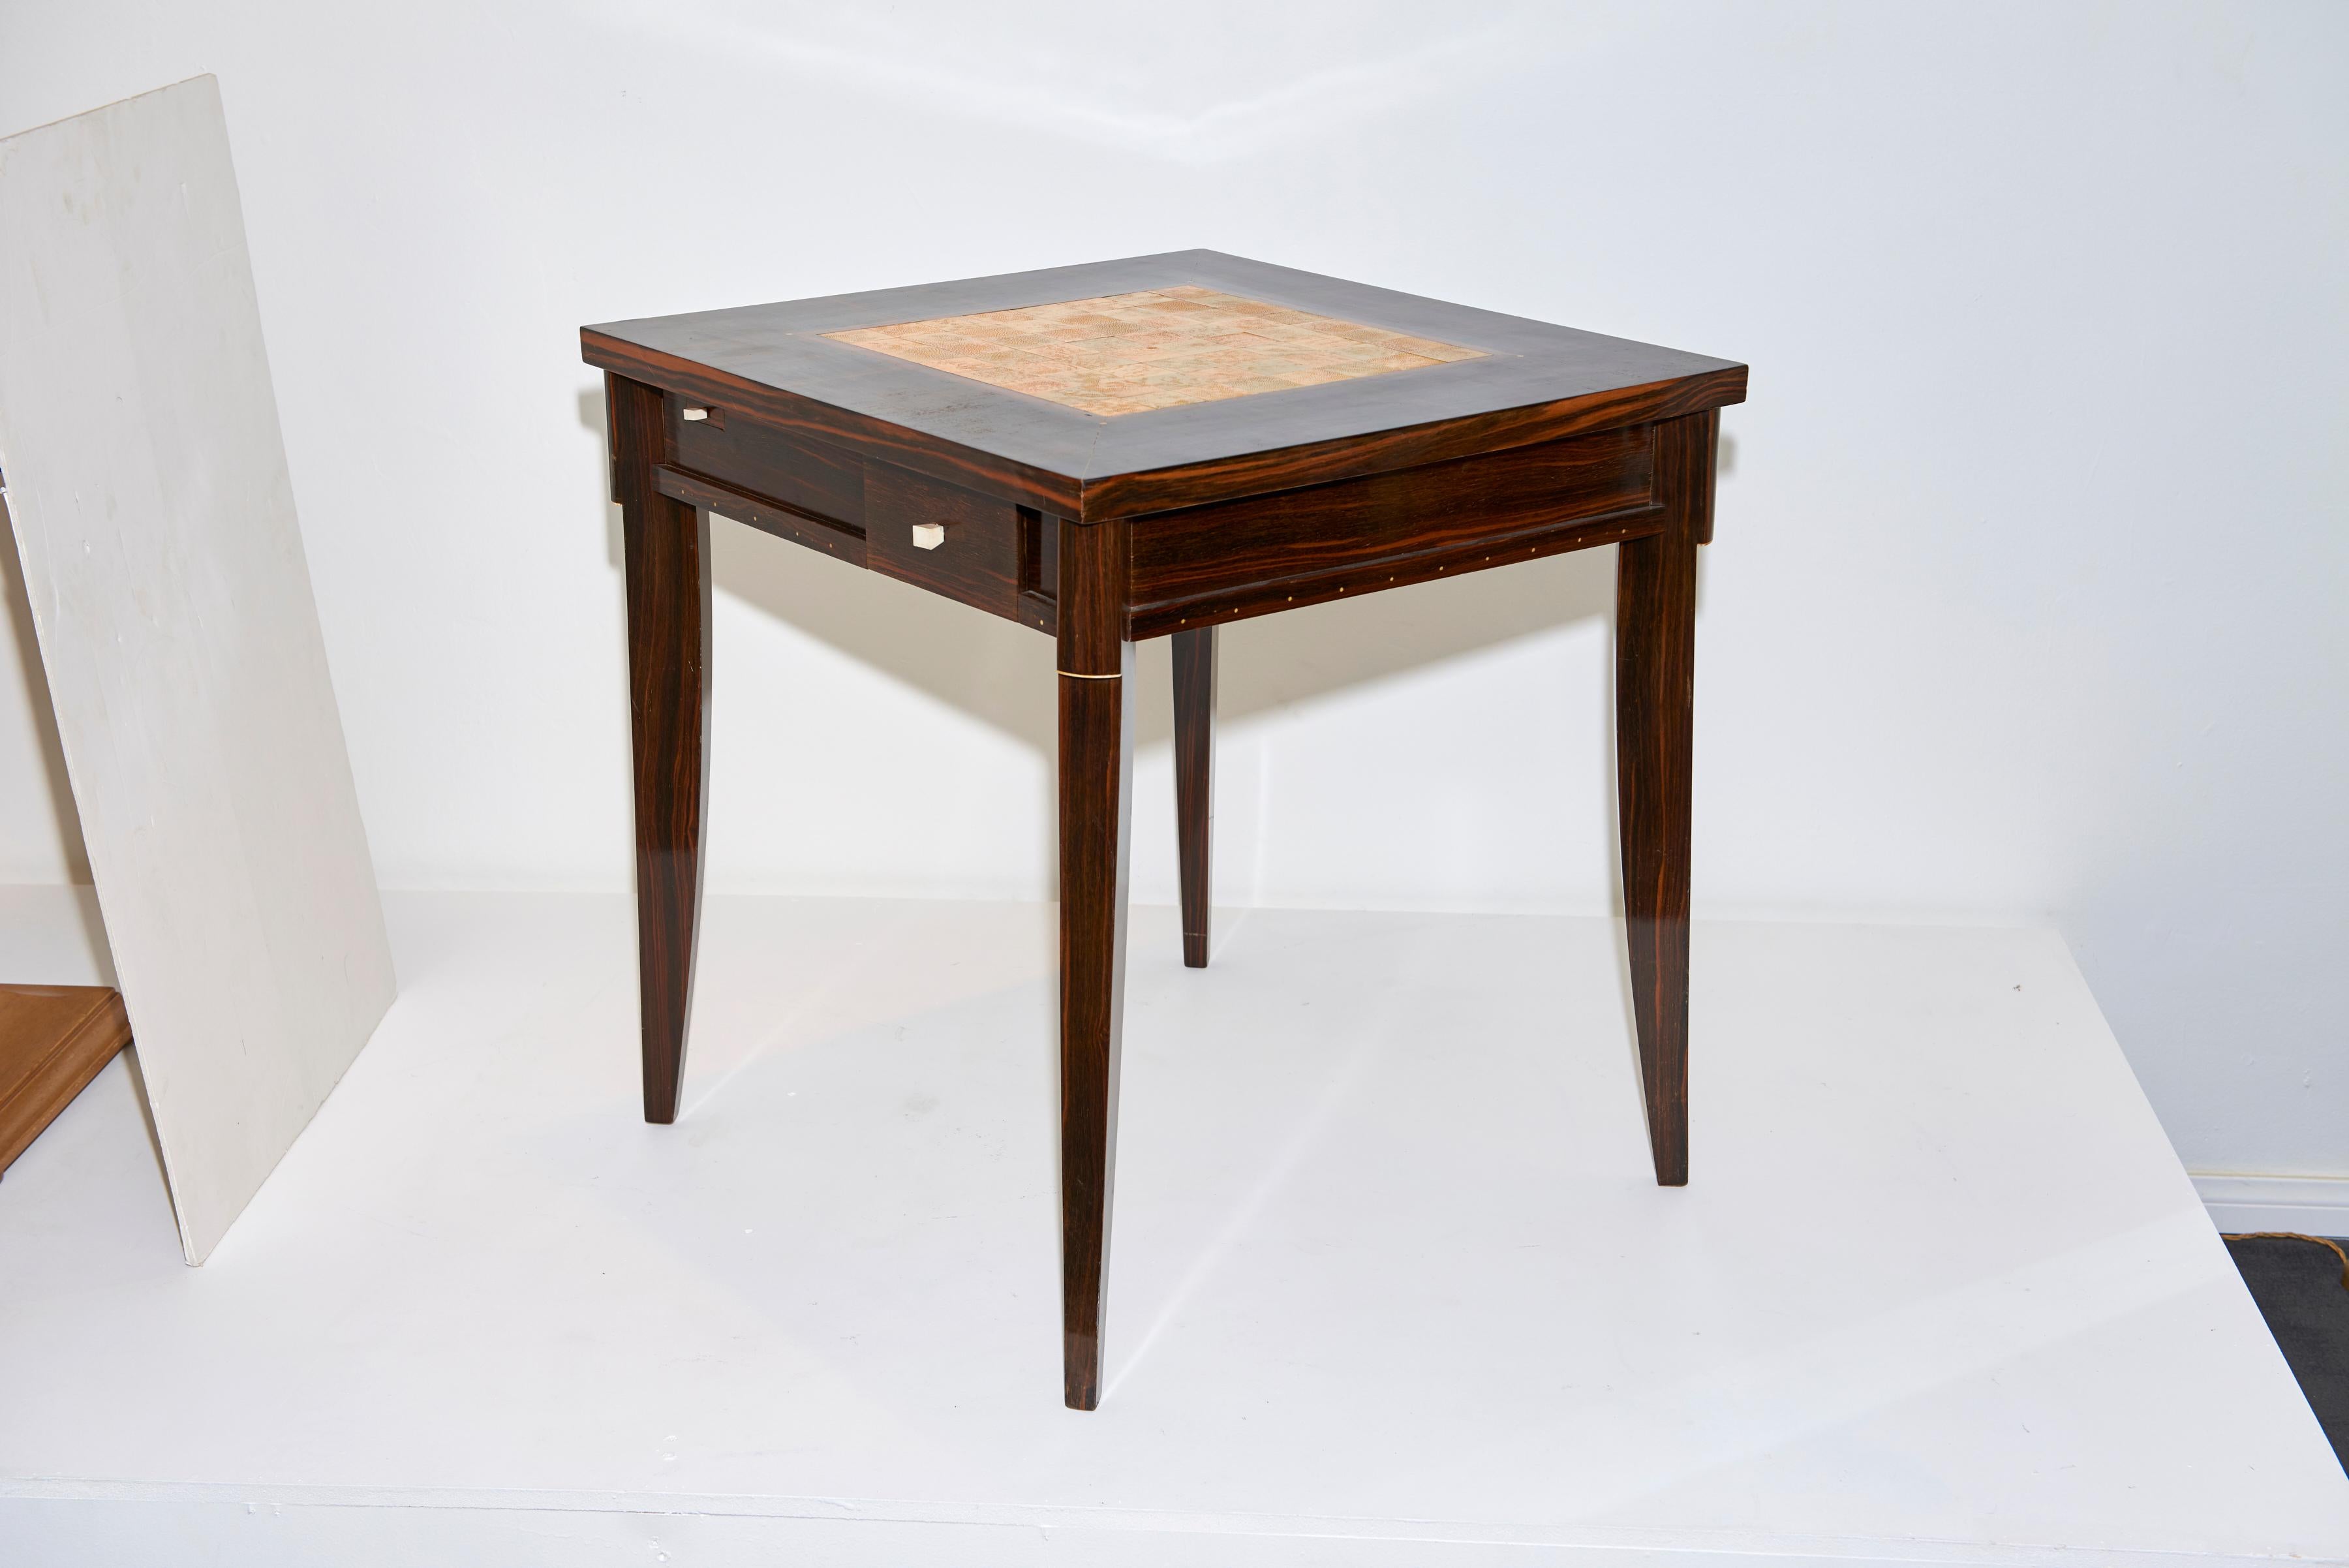 Clement Rousseau Macassar Games Table with Shagreen Top For Sale 1